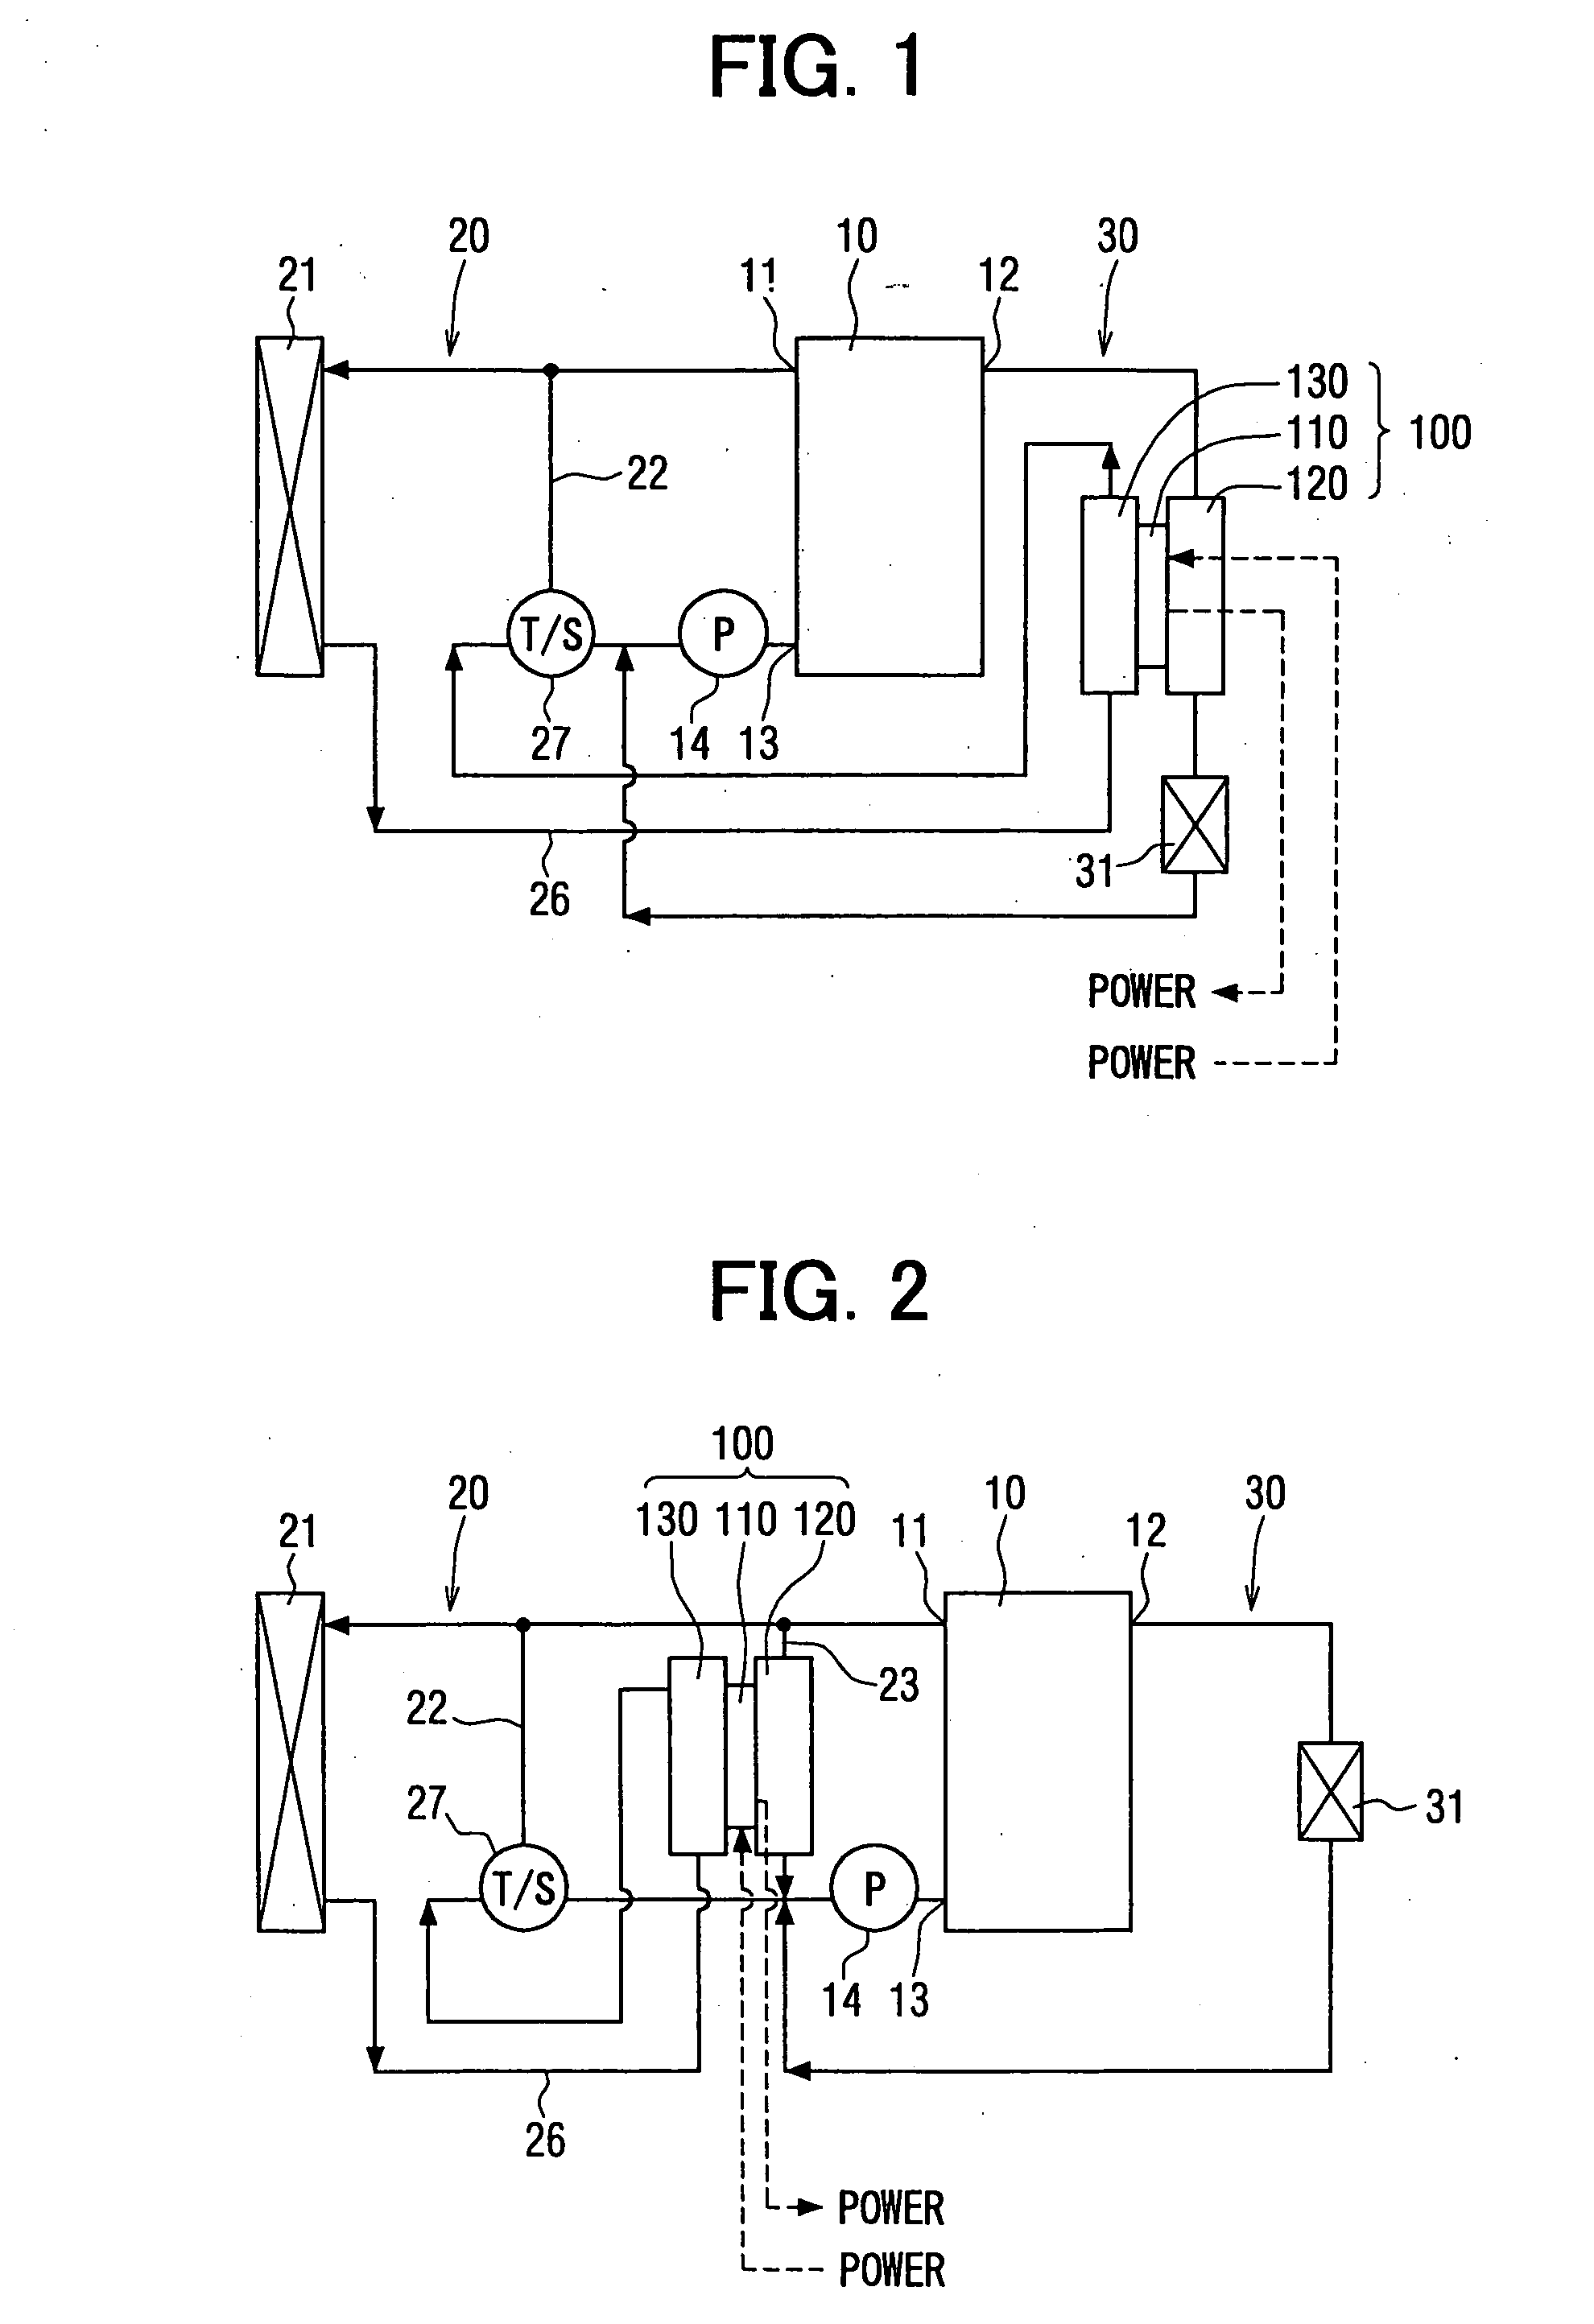 Thermoelectric power generation system